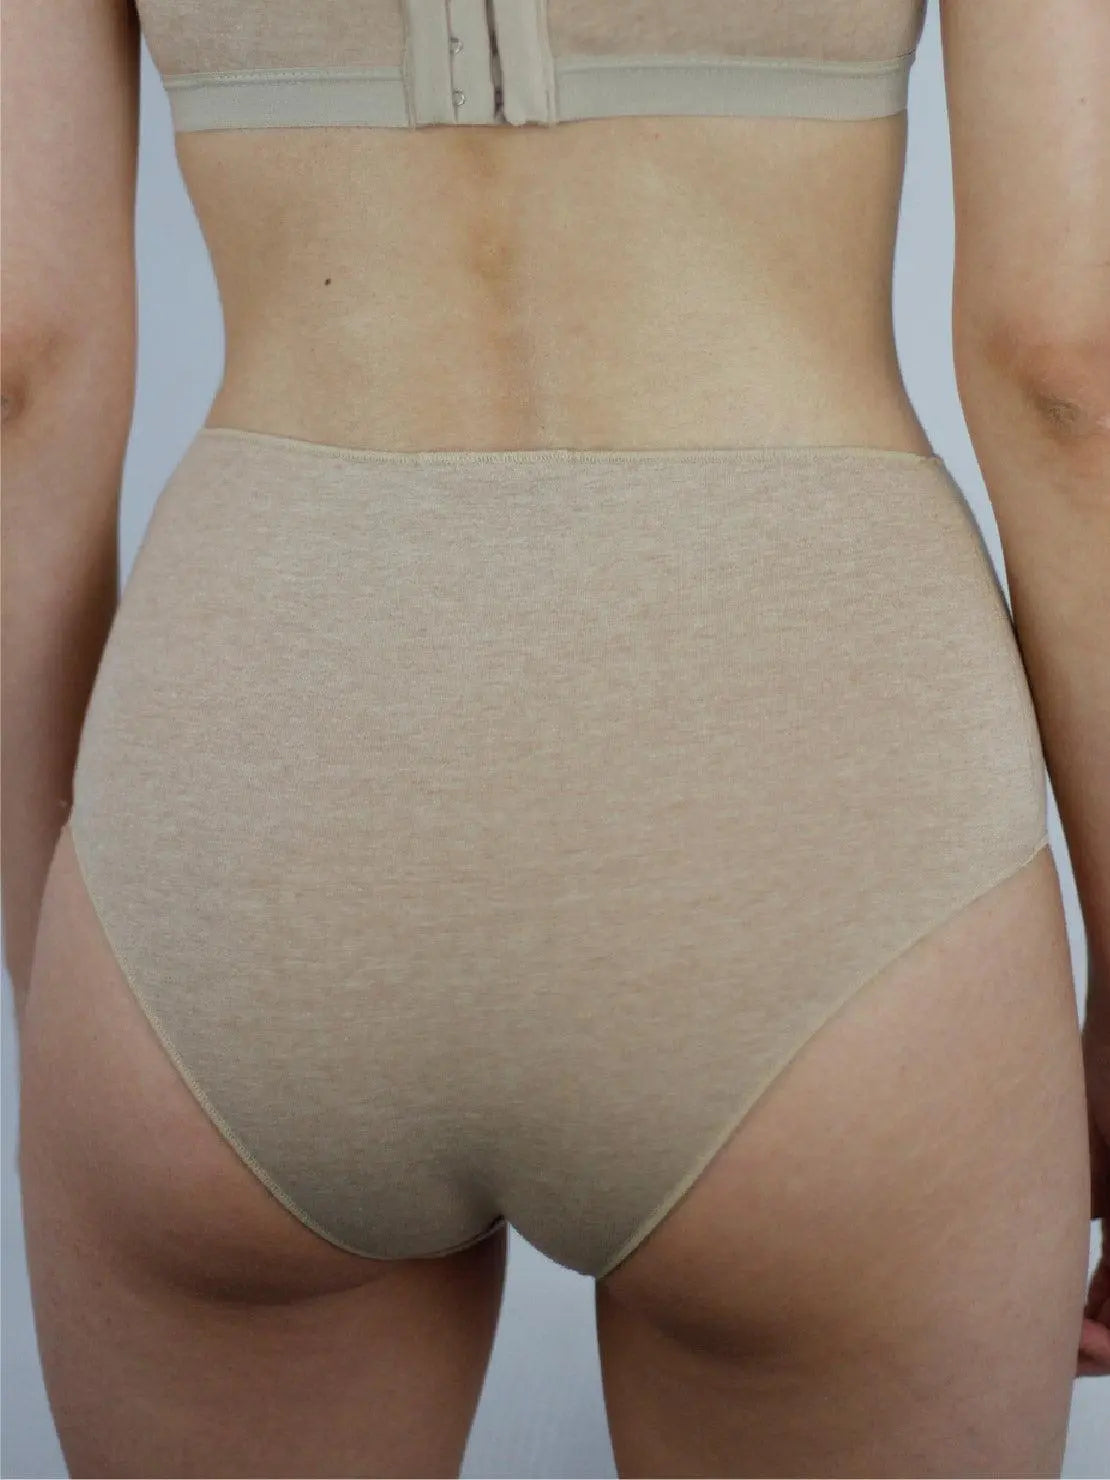 A person wearing a matching beige bra and Earth Basic Highwaist Organic Cotton Briefs from Talk Under Light stands against a plain white background. The focus is on the person's torso, highlighting the comfortable and seamless fit of the undergarments available at this trendy store in Barcelona.